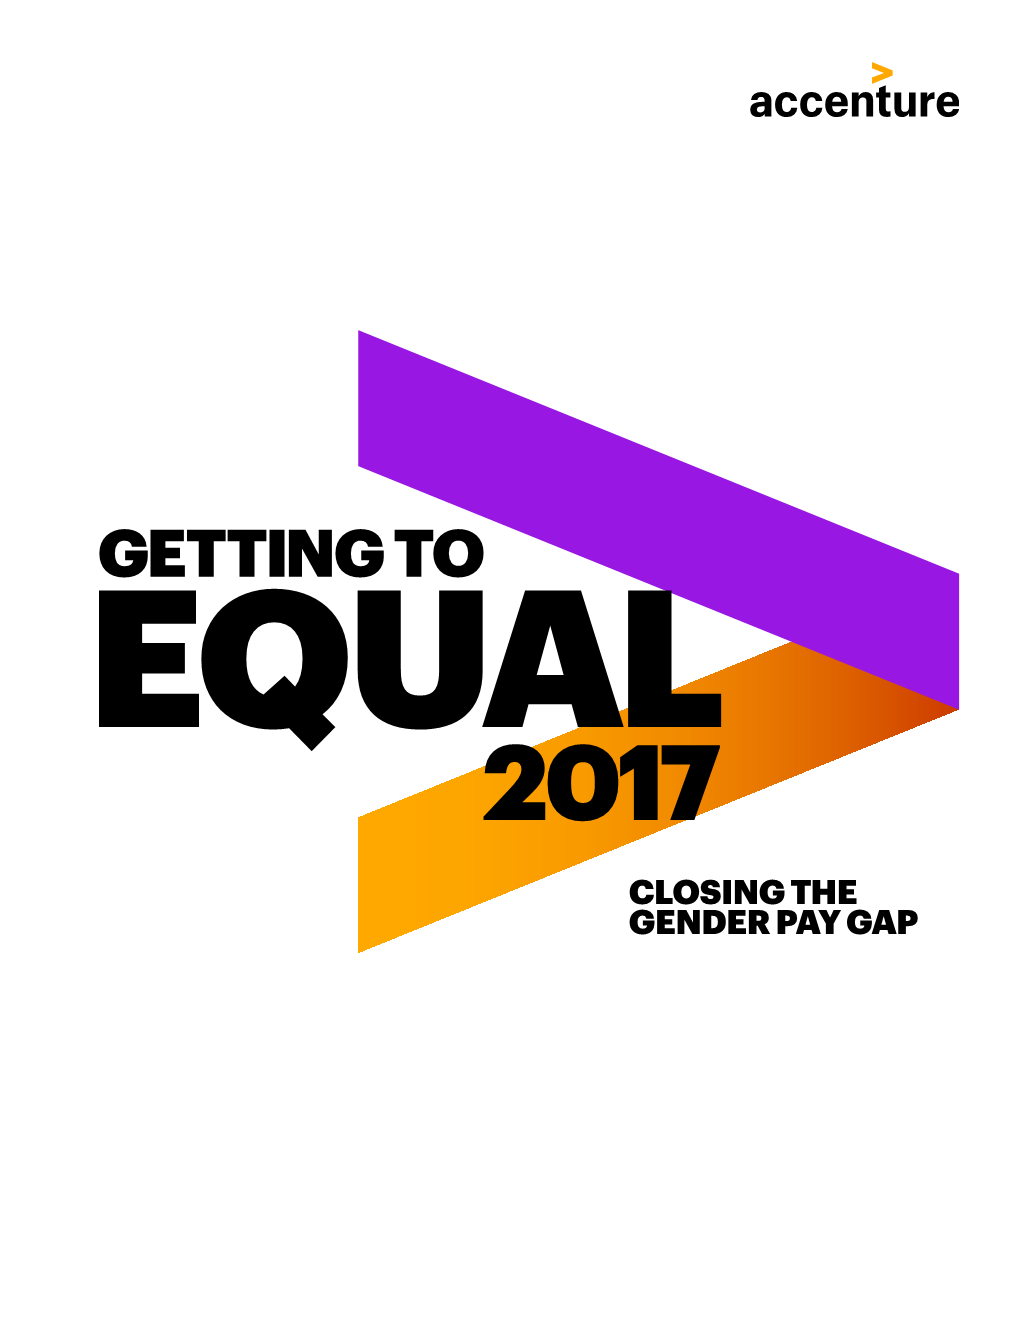 Getting to Equal 2017 | Accenture